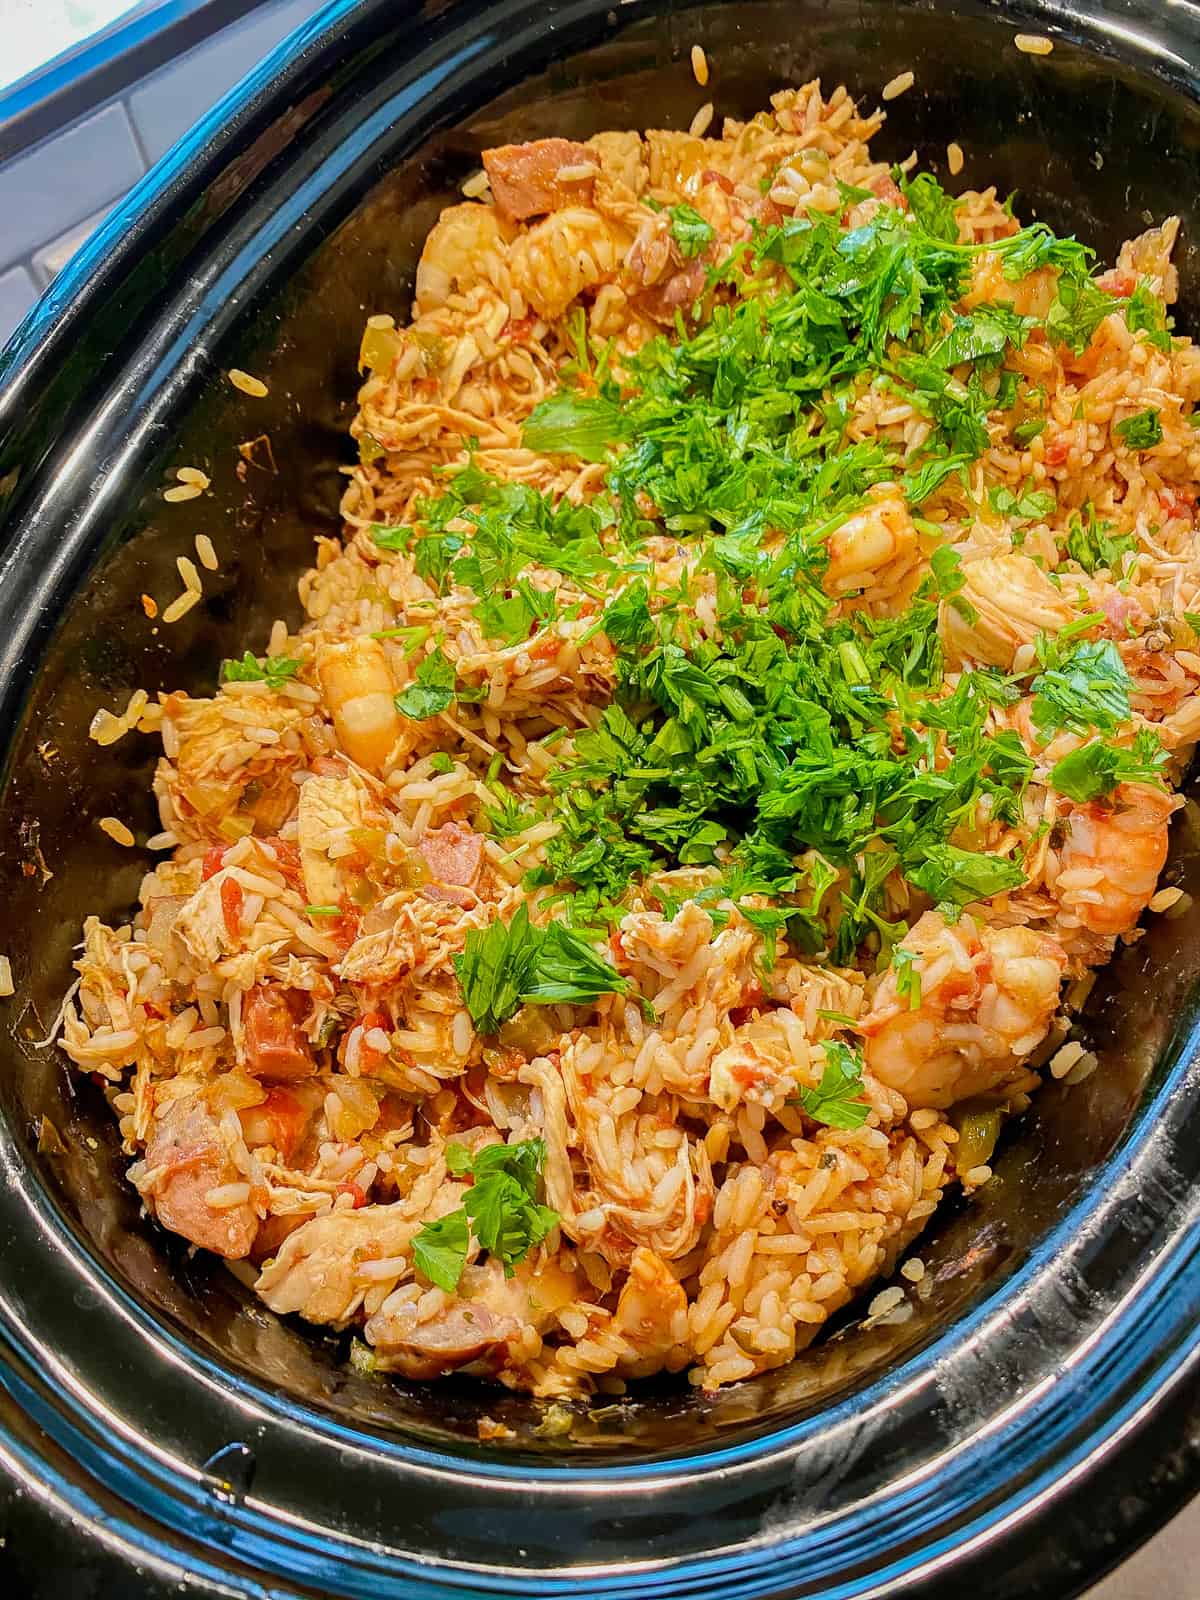 Black oval dish filled with rice, chicken, and shrimp with parsley on top.